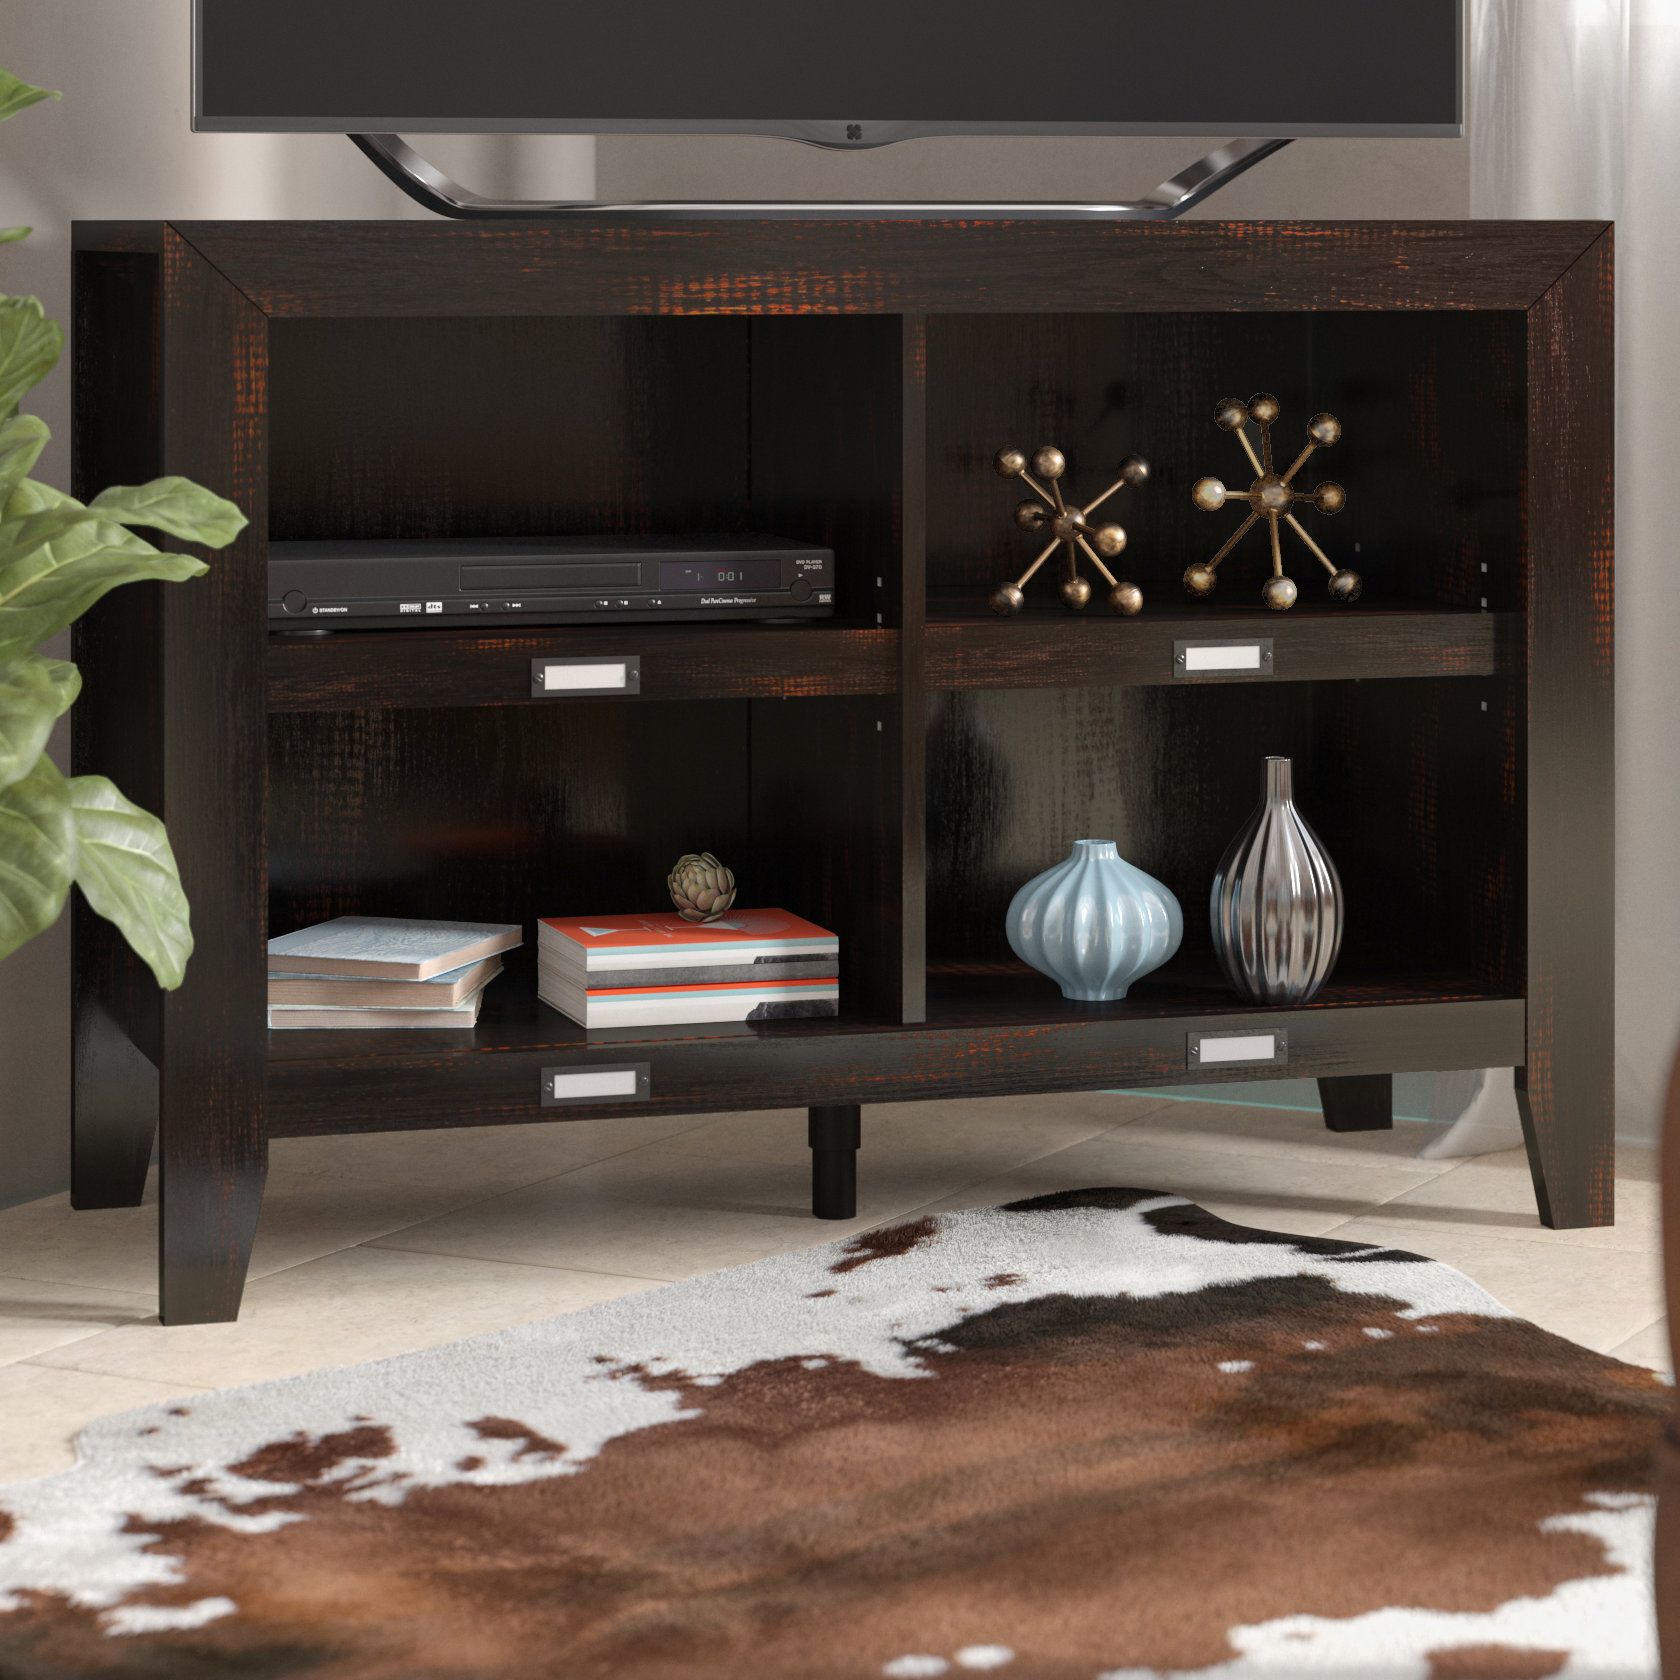 Mistana Ericka Tv Stand For Tvs Up To 42" & Reviews | Wayfair With Regard To Recent Ericka Tv Stands For Tvs Up To 42&quot; (View 1 of 20)